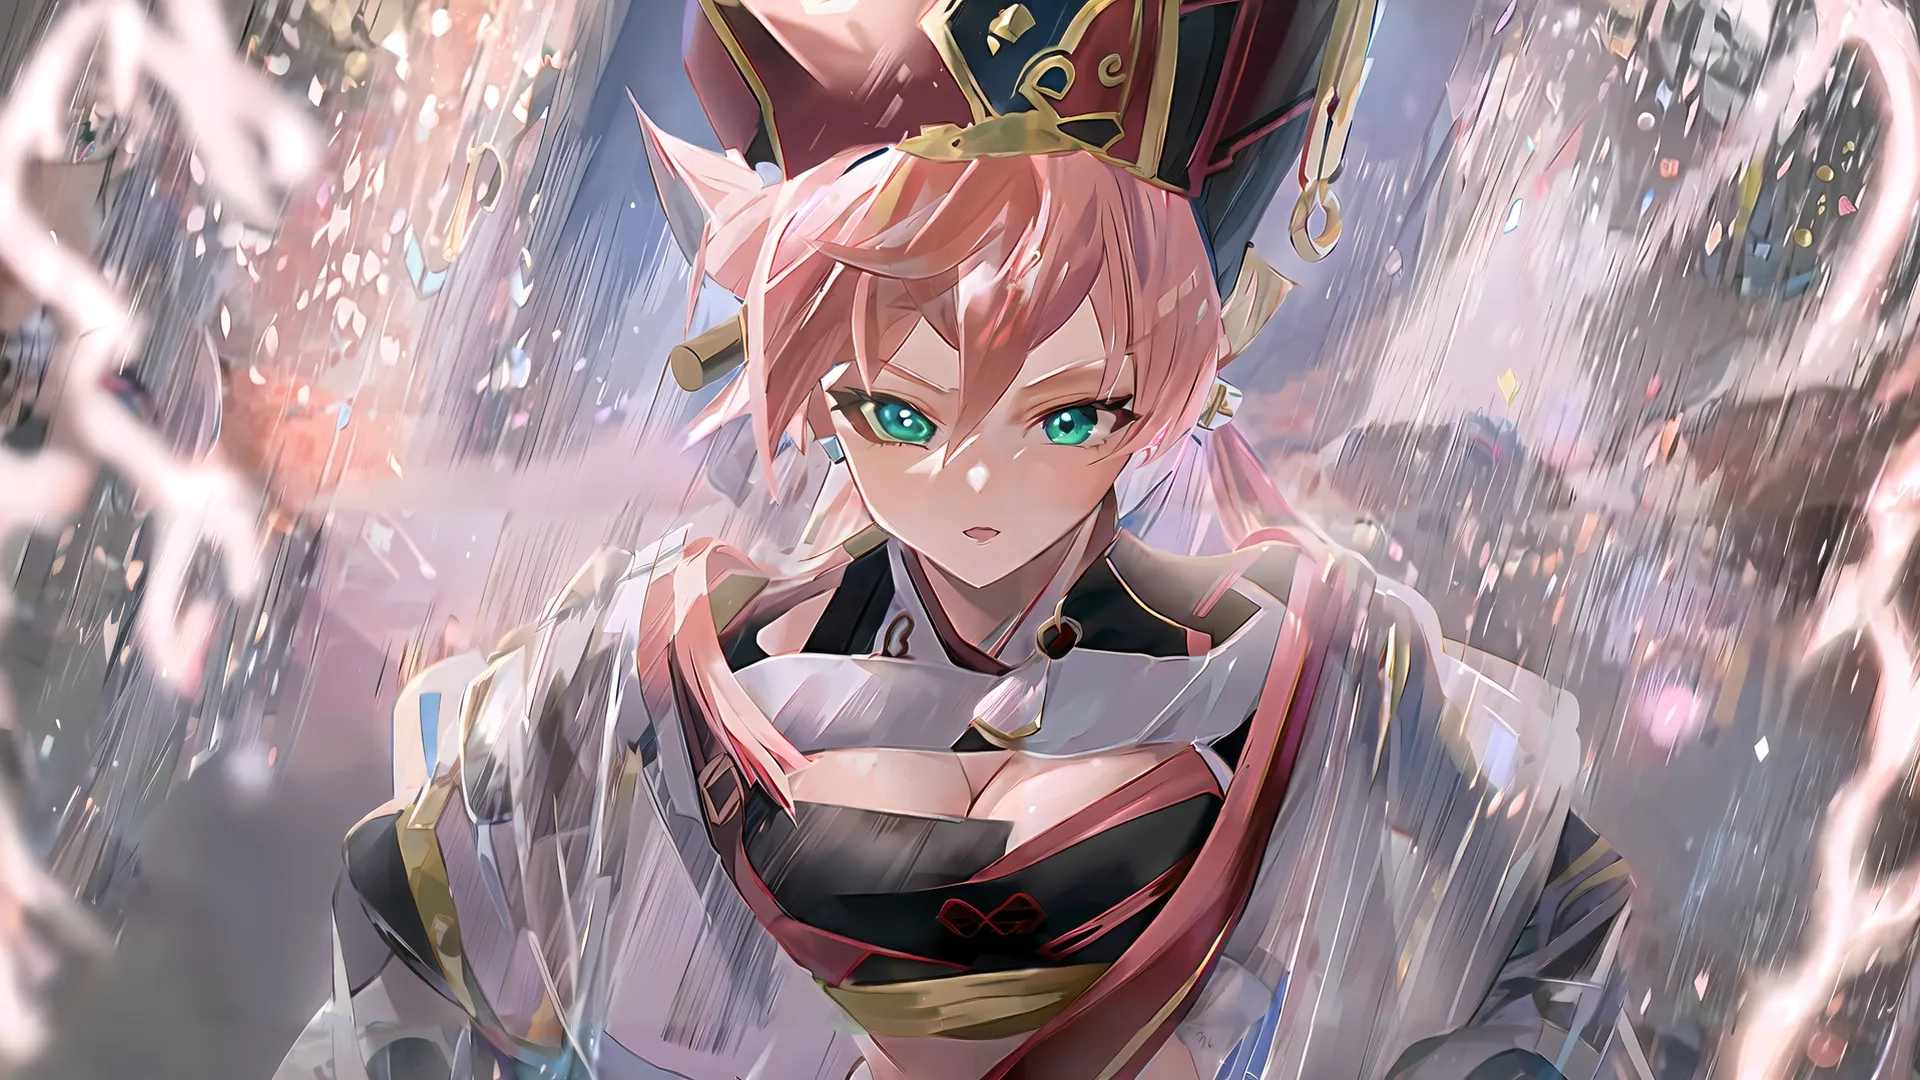 anime character standing in the rain under rainy umbrellas with storm coming off to her face for a photo look - like effect, from a real portrait
